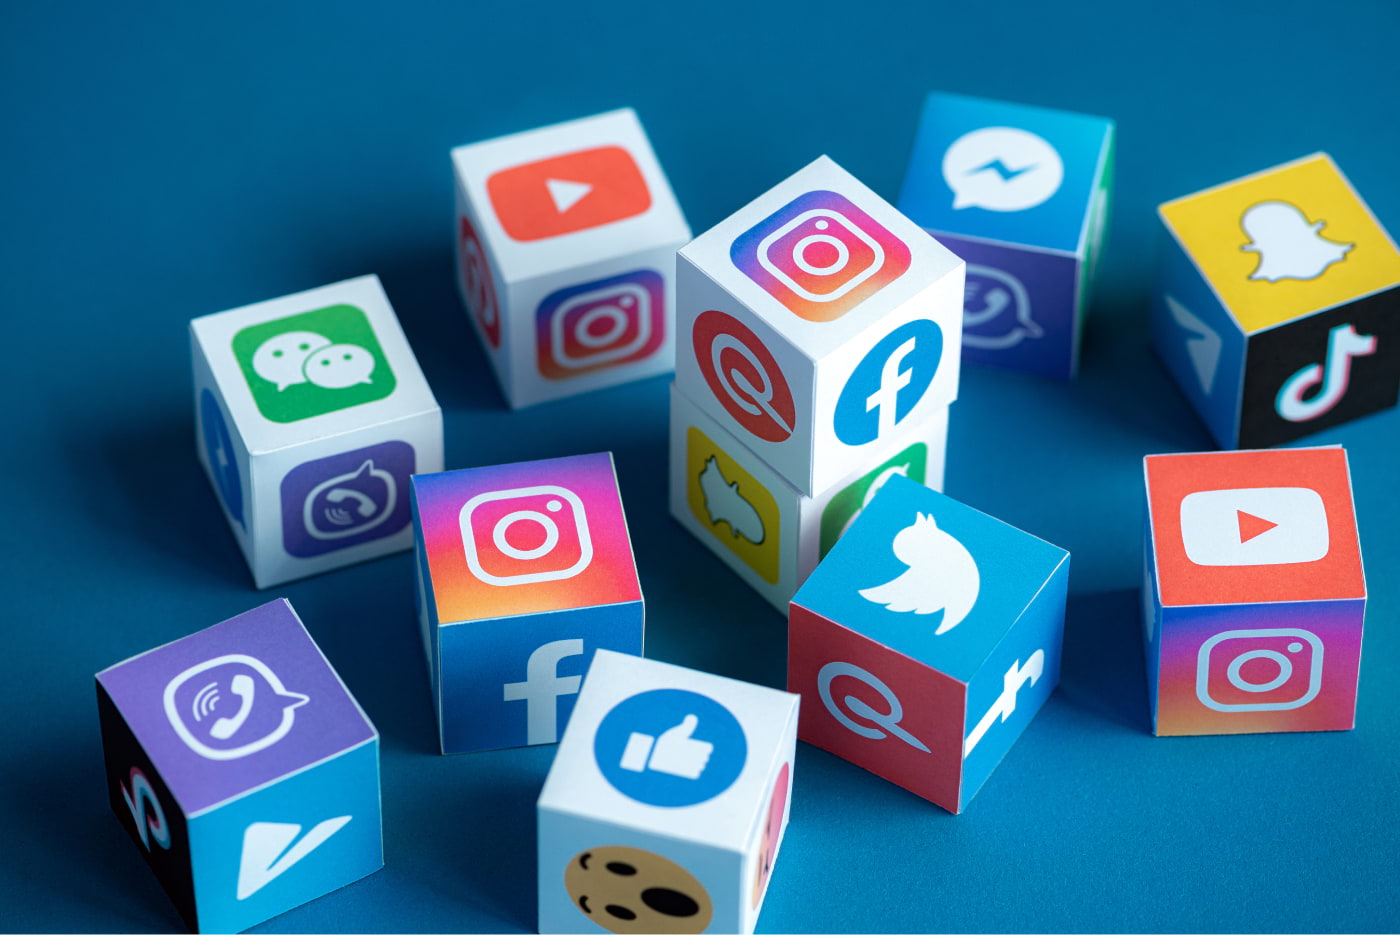 Cubes with social media logos and icons on them. Including Twitter, Facebook, Instagram, Youtube, Pinterest, Snapchat, TikTok, and Messenger.